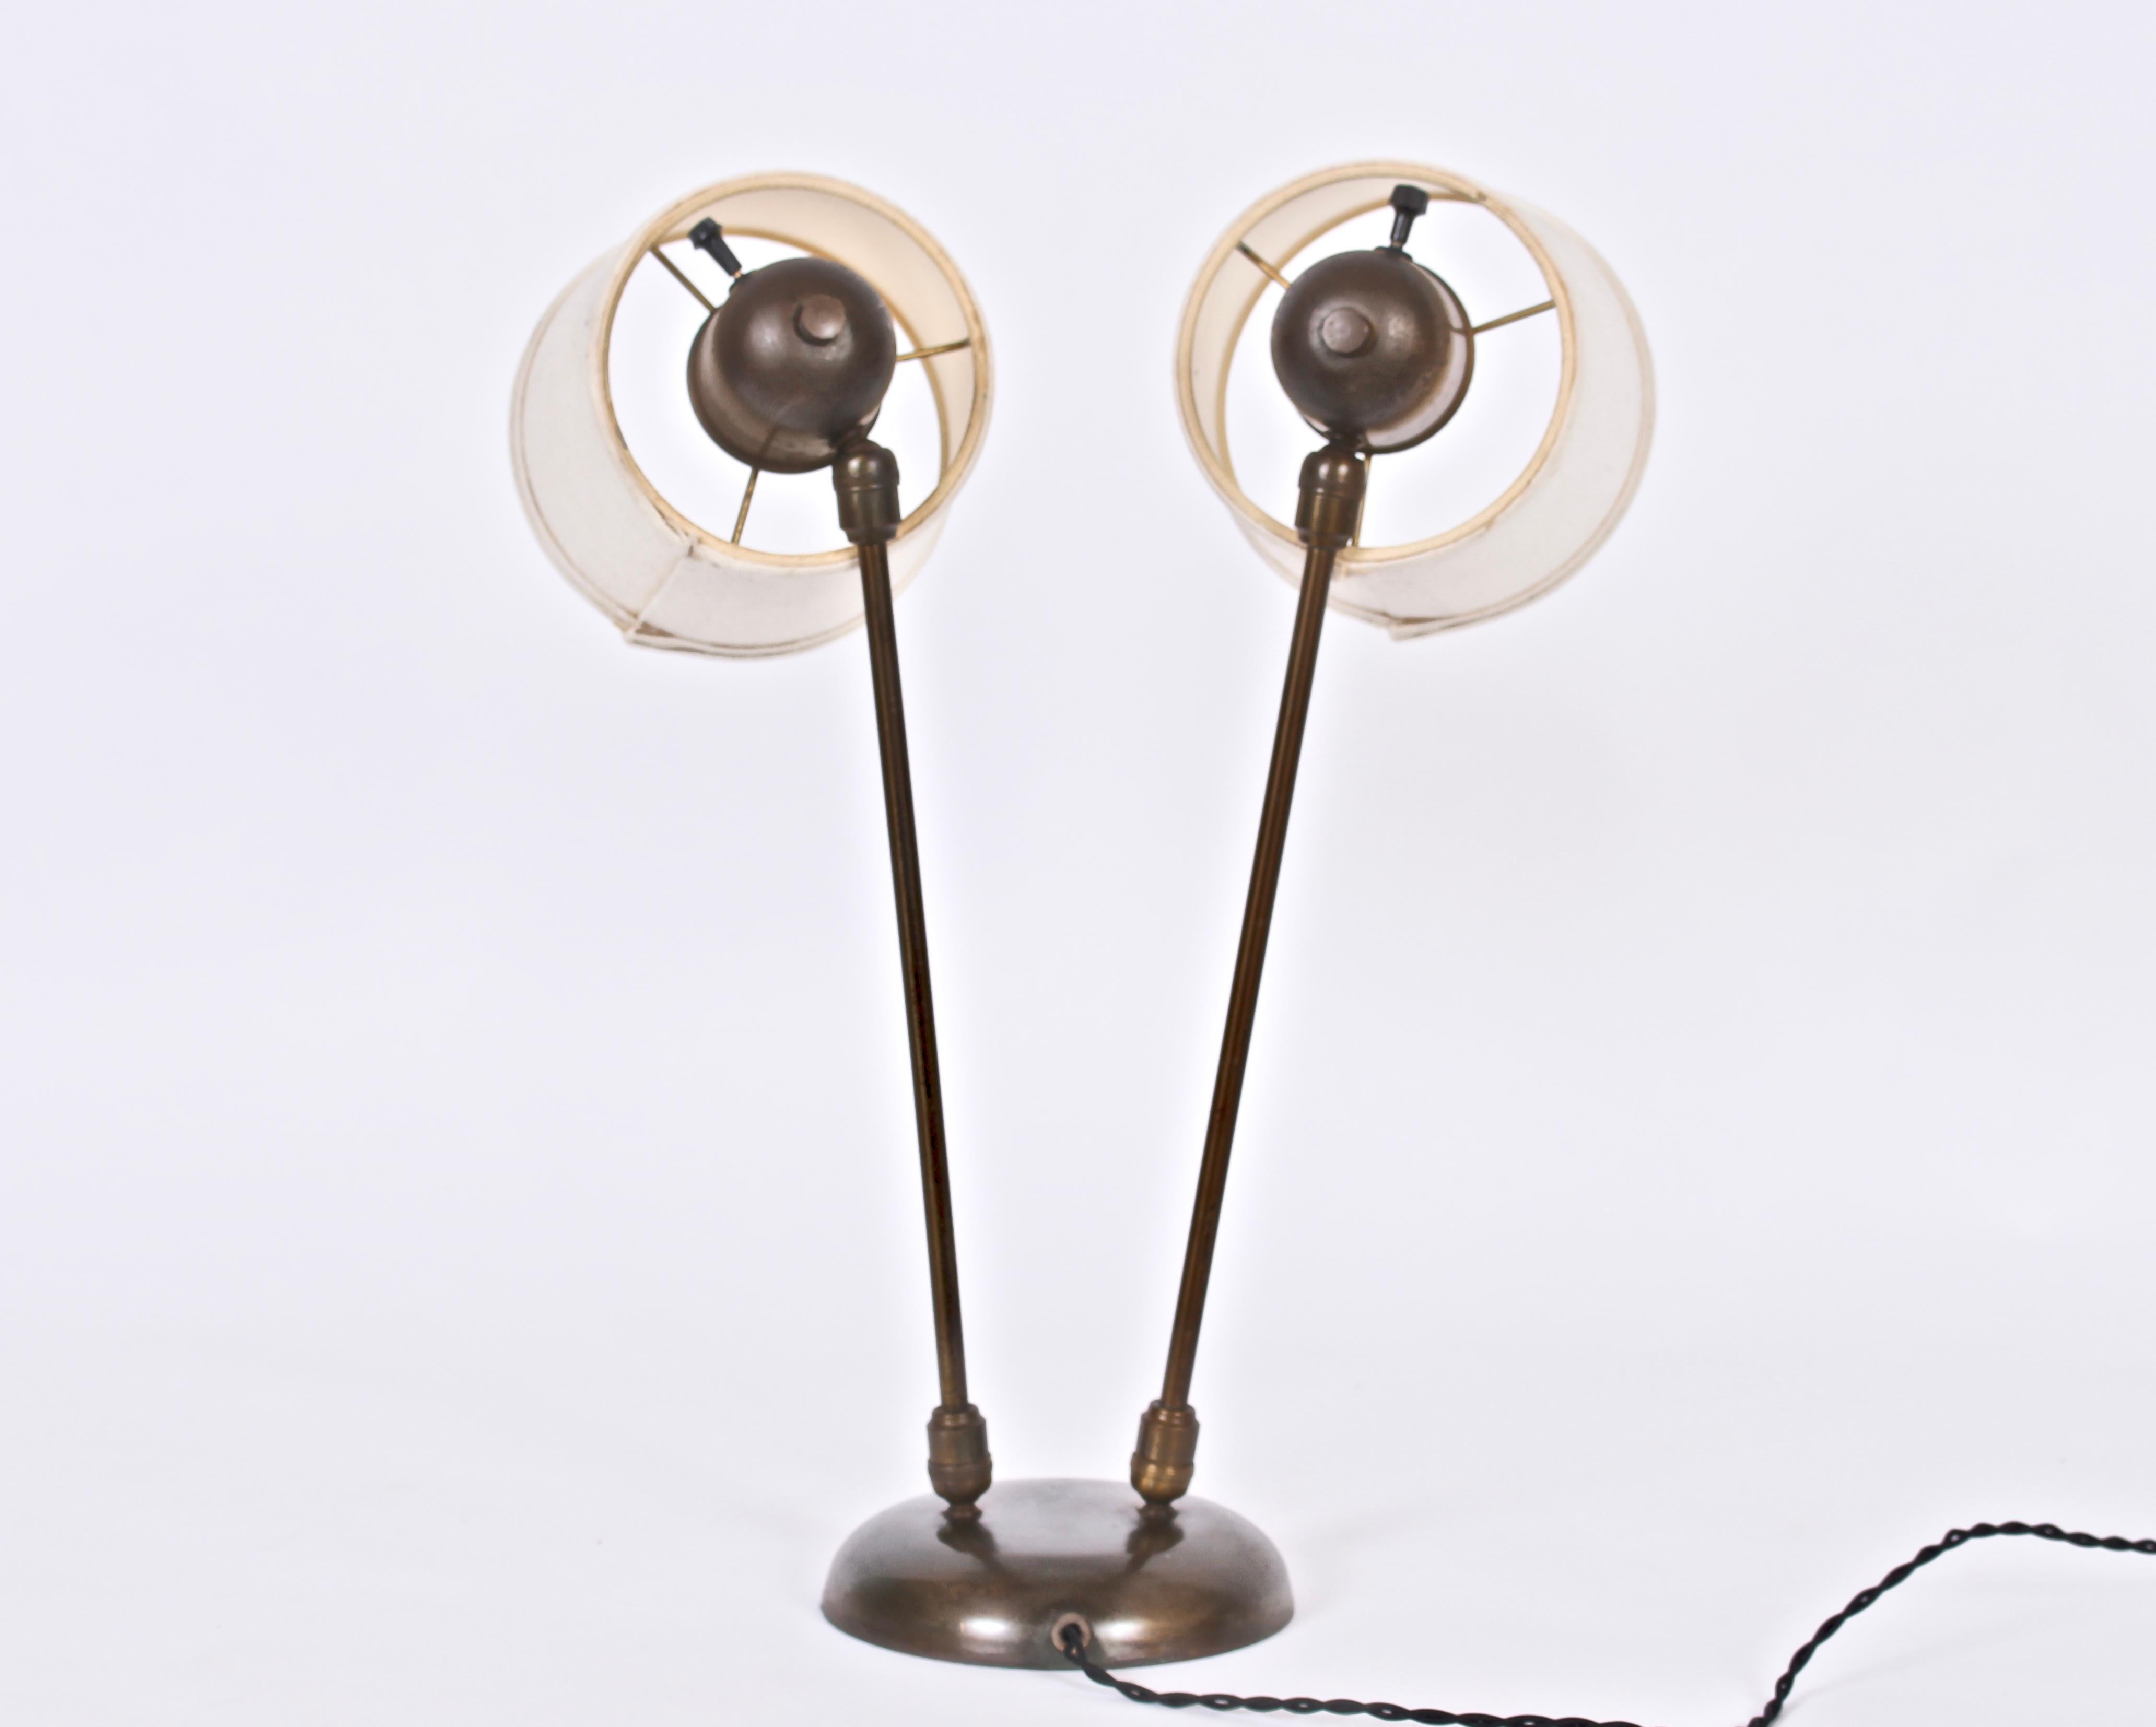 Modern David Wurster Double Head Brass Desk Lamp with Barrel Shades, C. 1950 For Sale